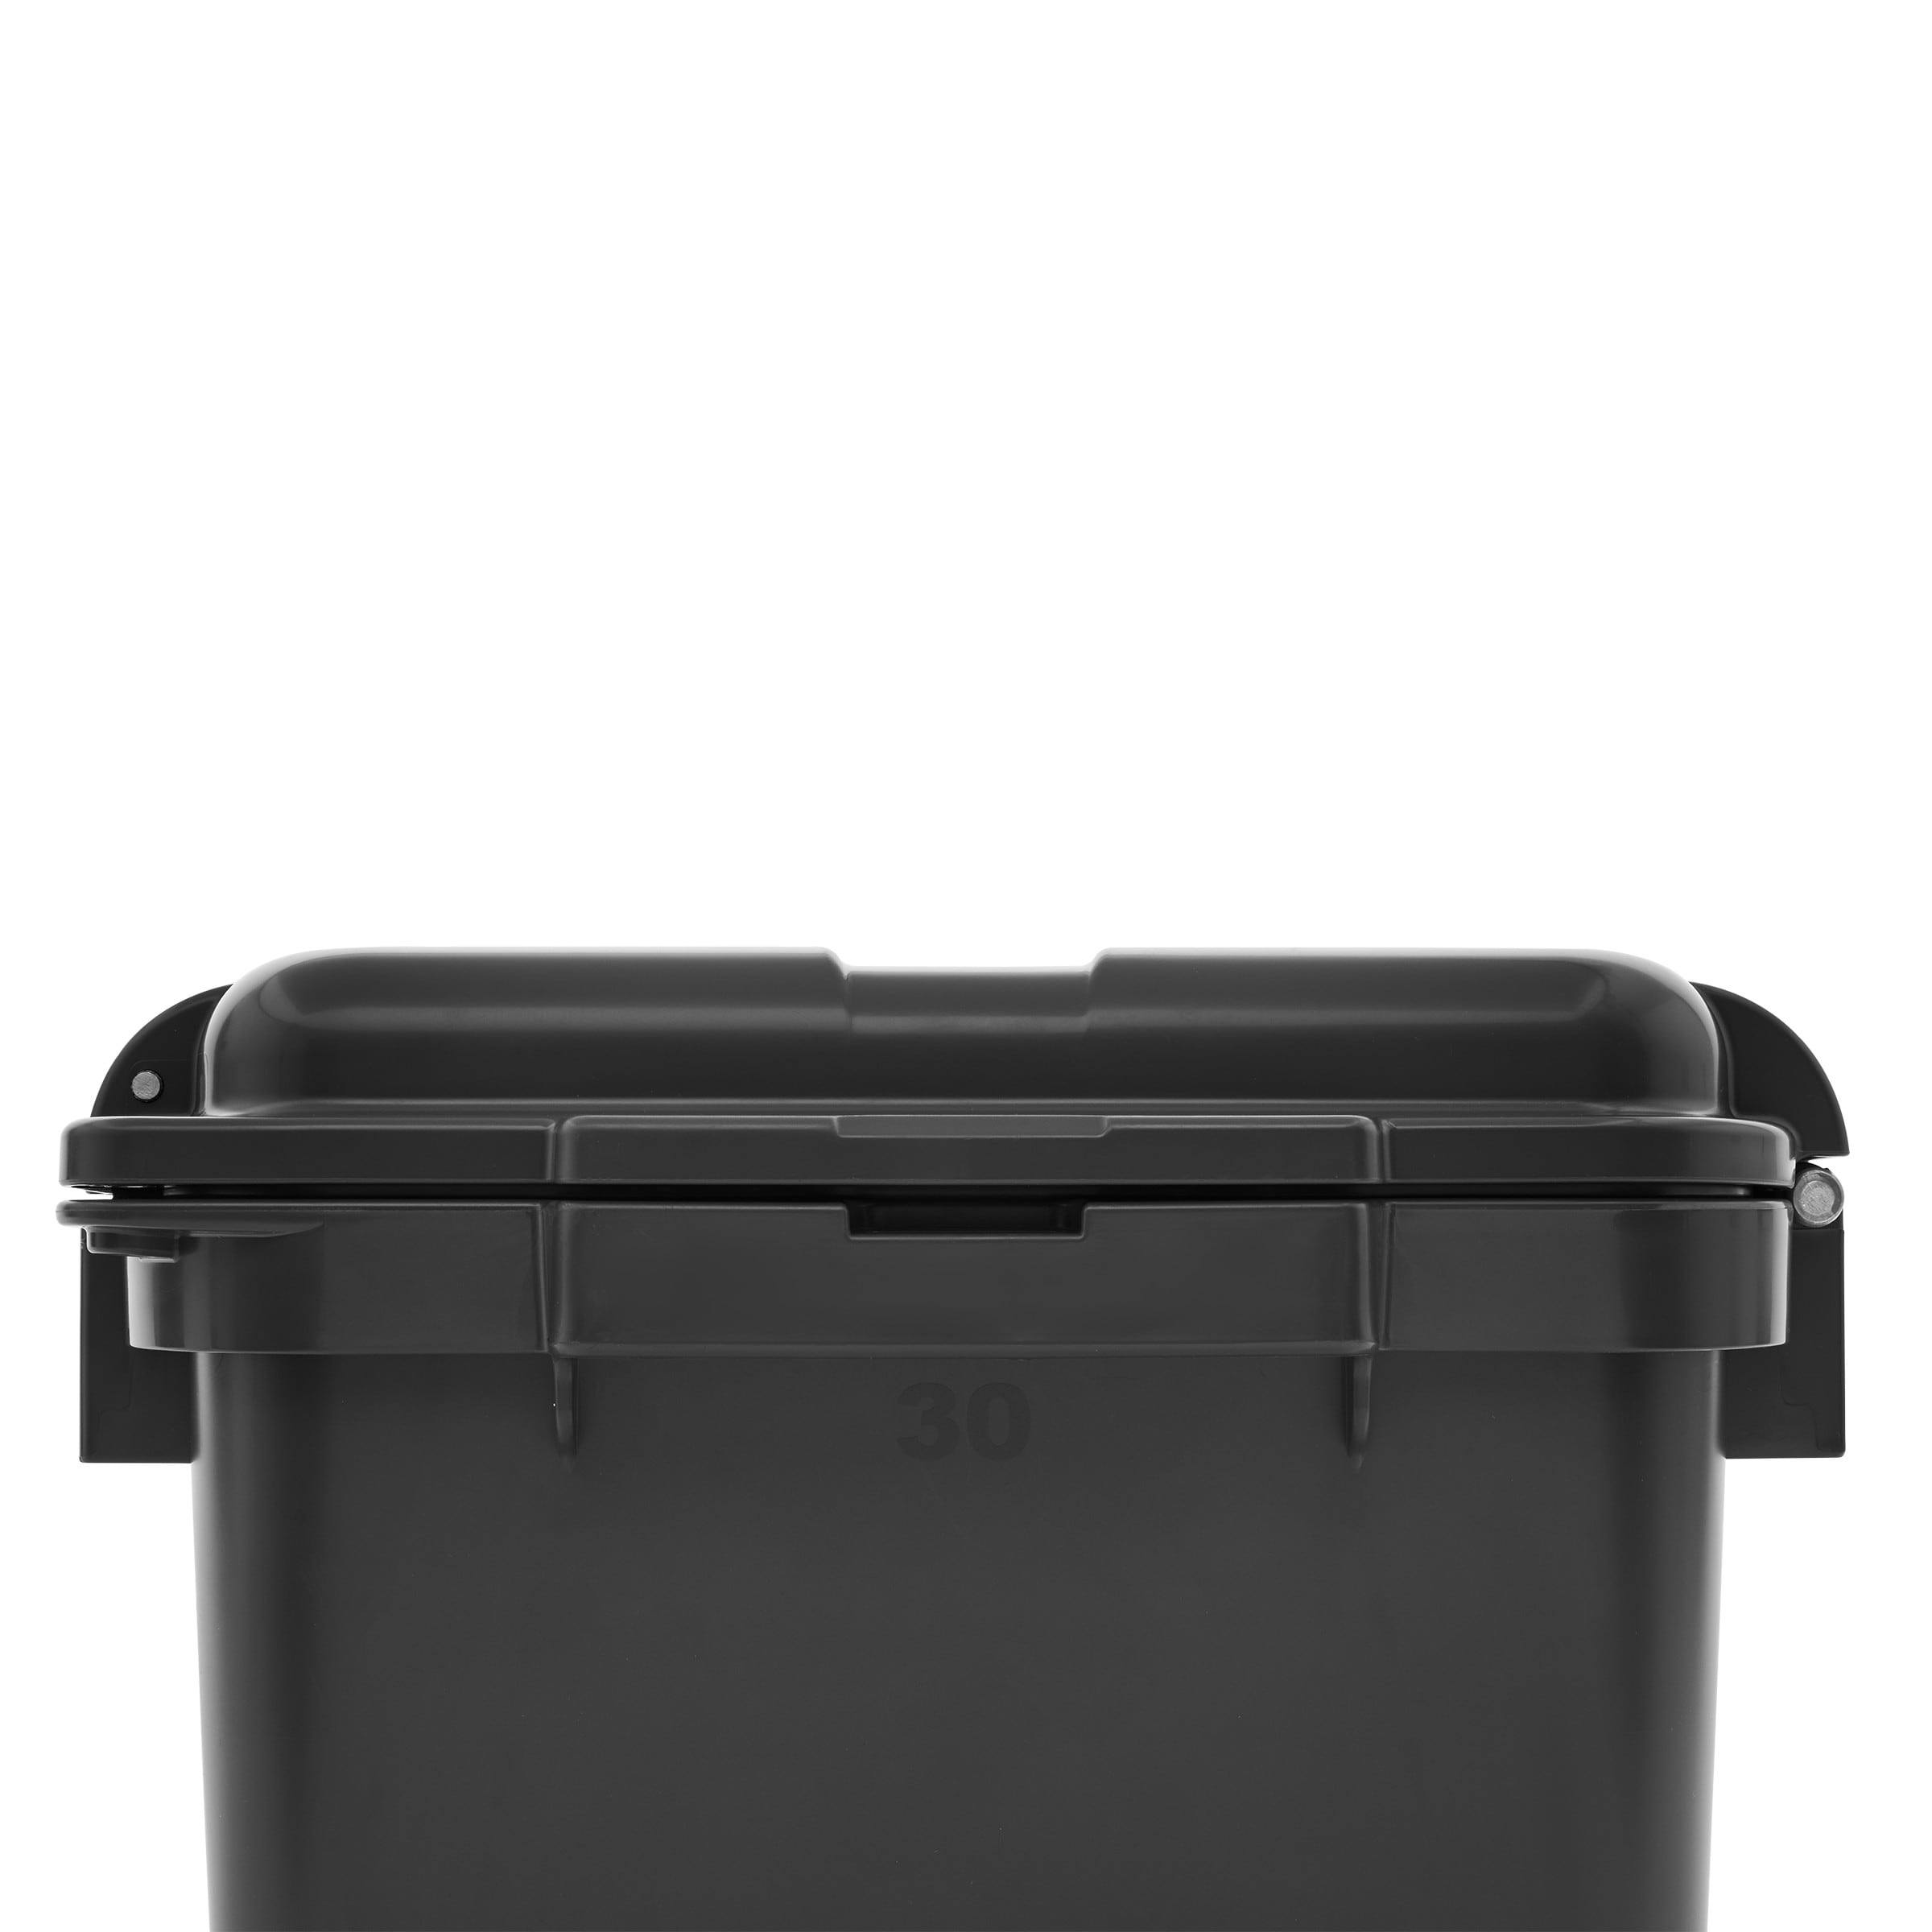 Basicwise Green Stackable Plastic Storage Container - Ideal Gear Storage  Solution - 10.3-in W x 11.1-in D x 9.1-in H - HDPE Plastic - Bucket Caddy  in the Gear Storage & Containers